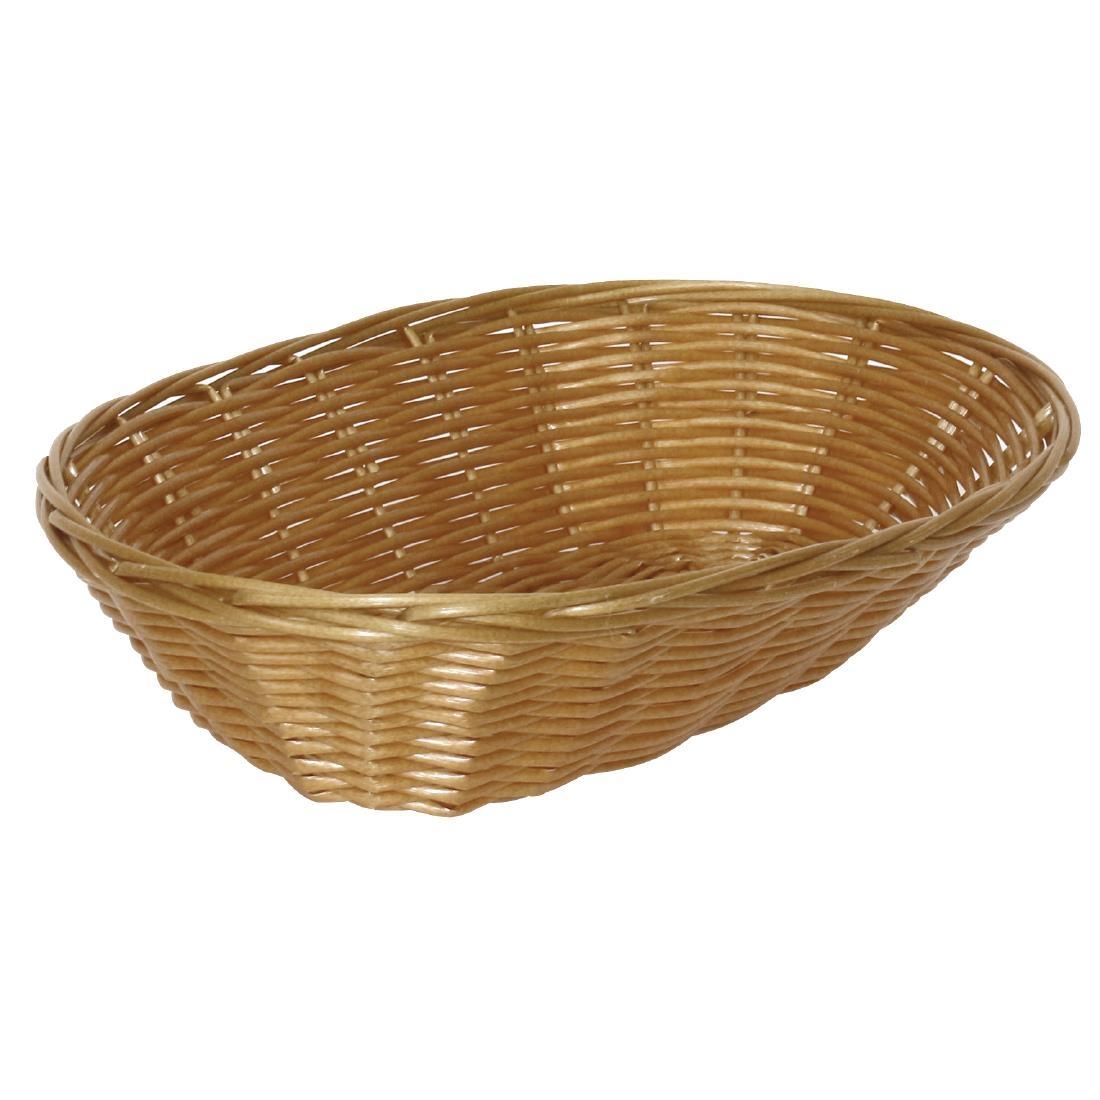 Poly Wicker Oval Food Basket (Pack of 6) - T364  - 1